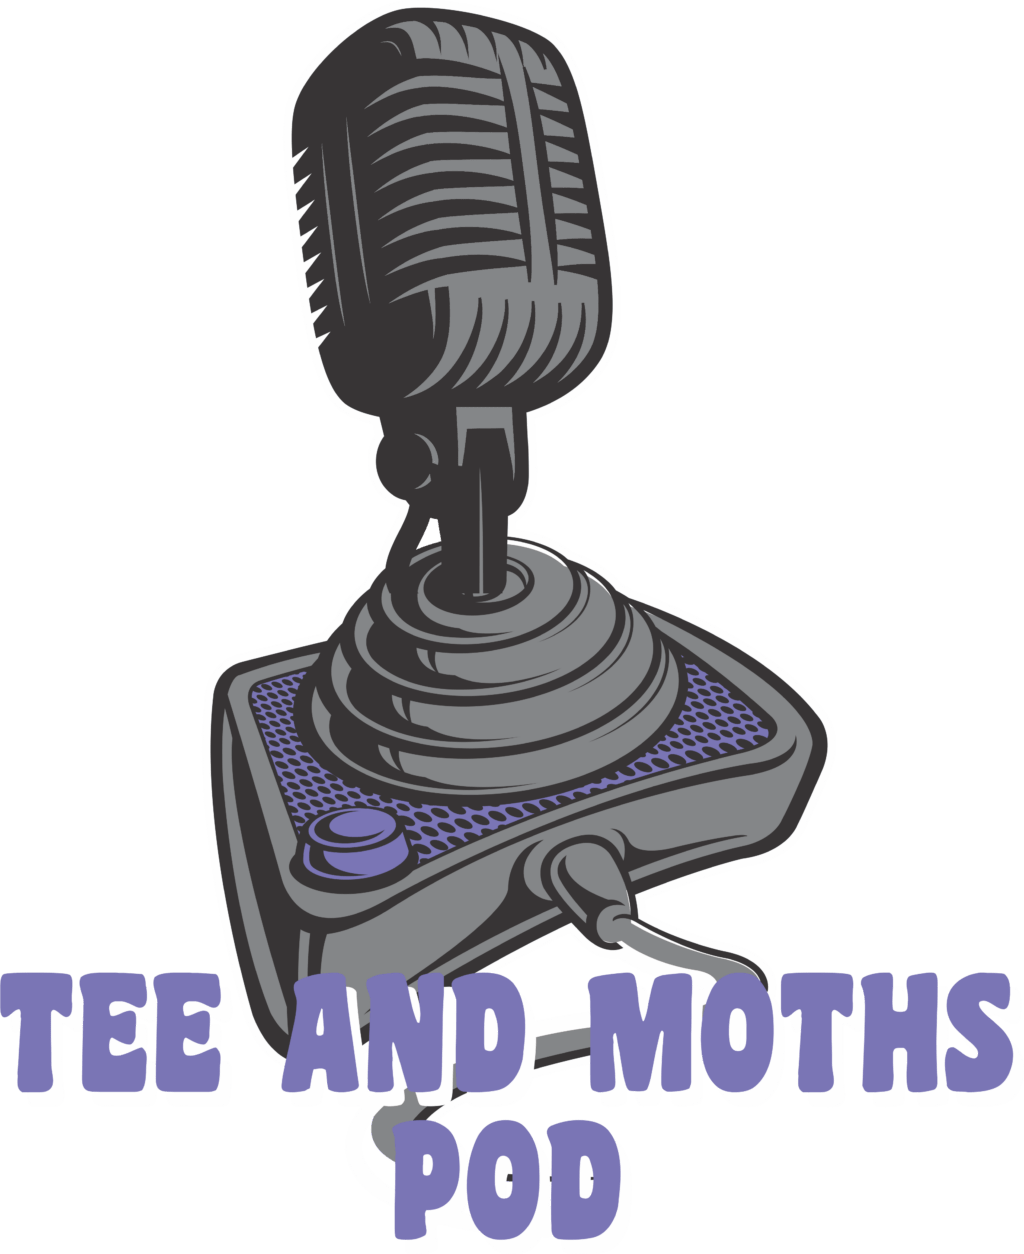 TEE AND MOTHS POD for black shirts